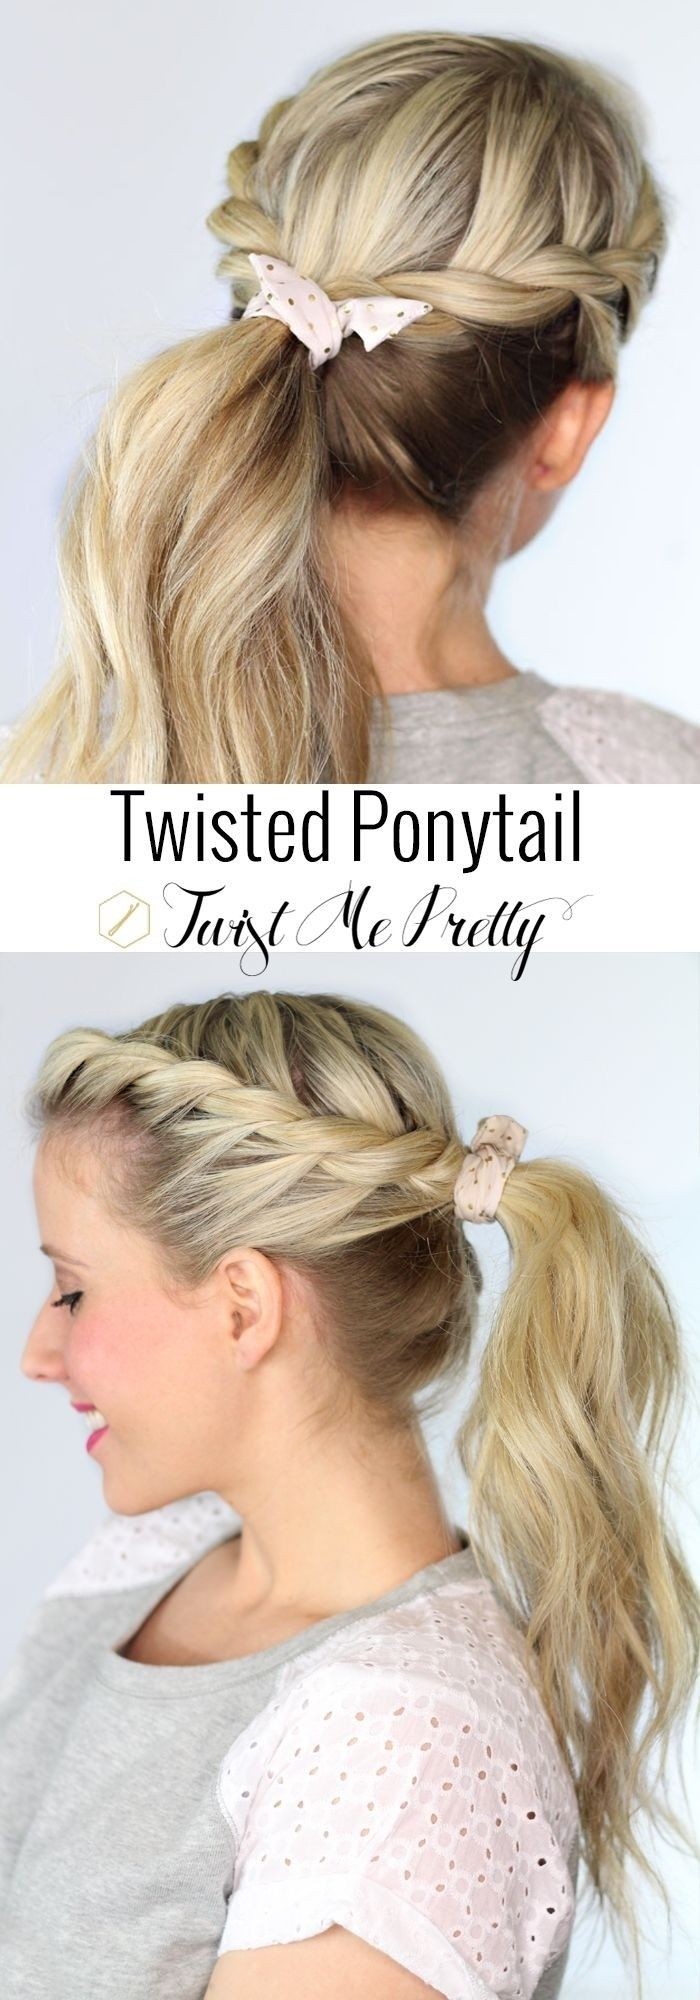 Twisted Ponytail for Long Hair